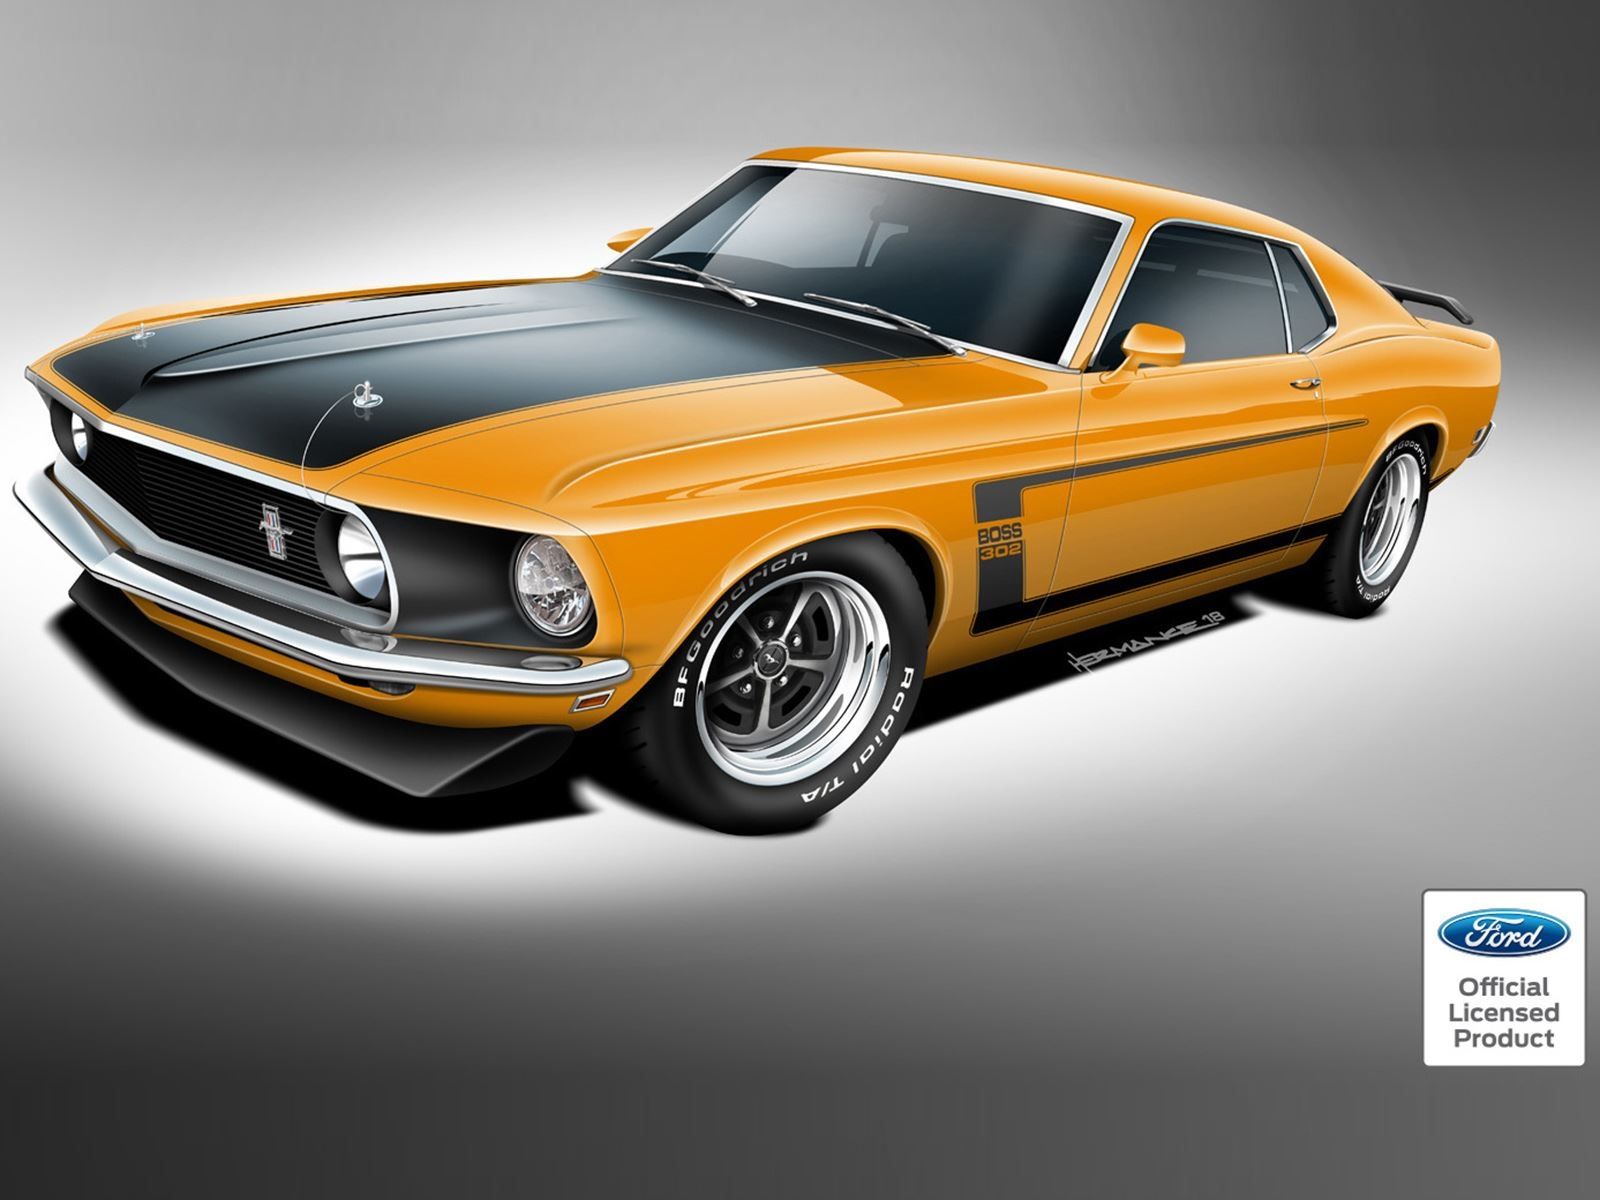 Ford Officially Licenses Brand-New Boss 302, Boss 429, And Mach 1